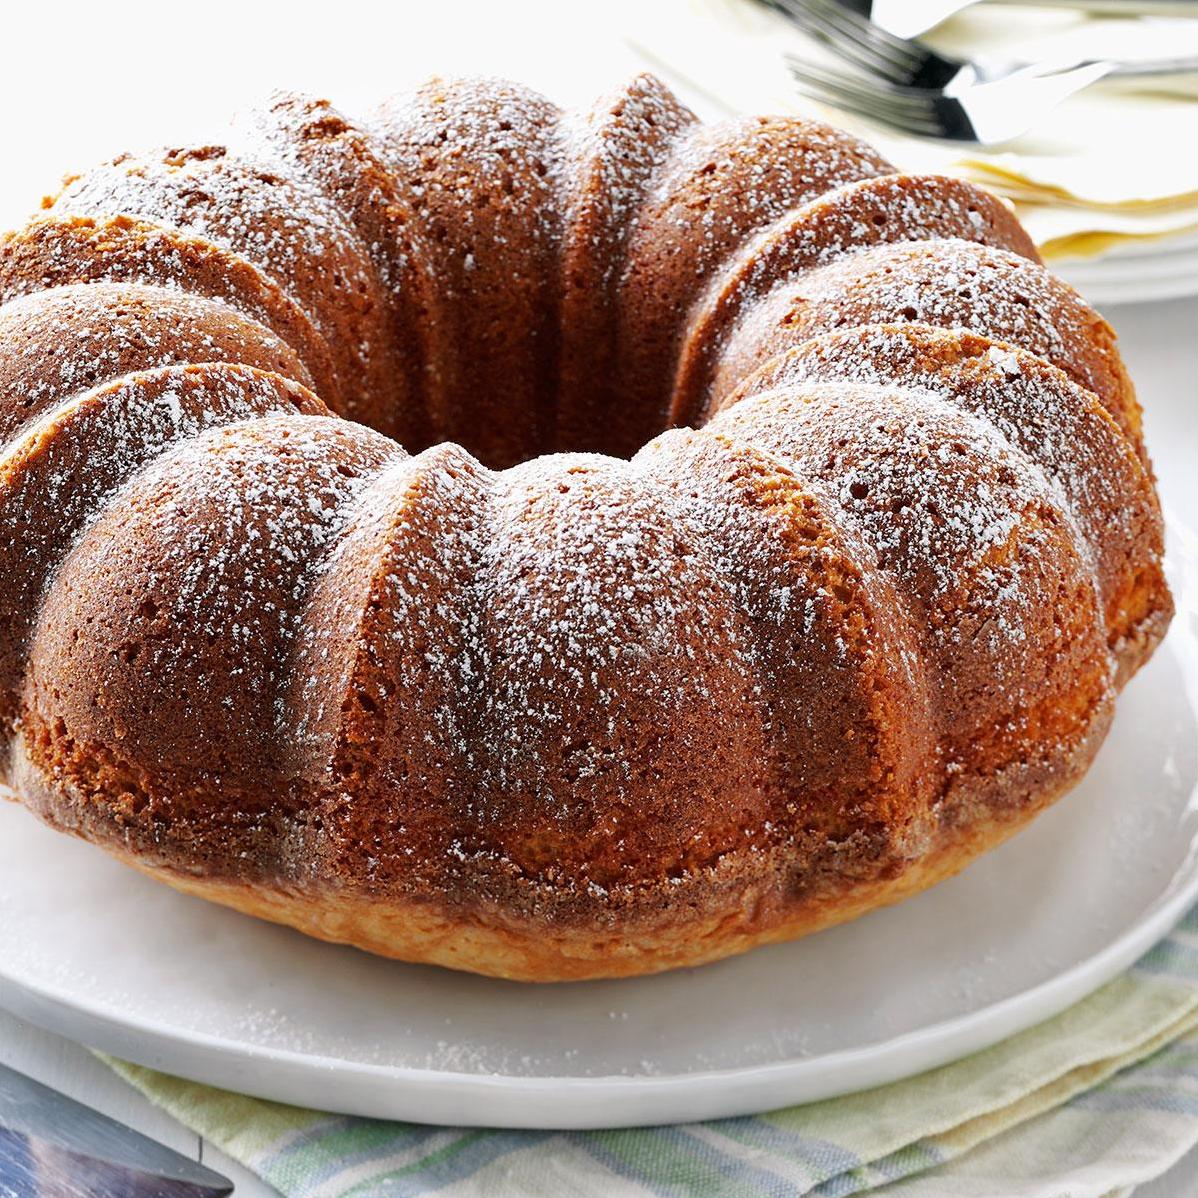  Moist and buttery, just how a pound cake should be.